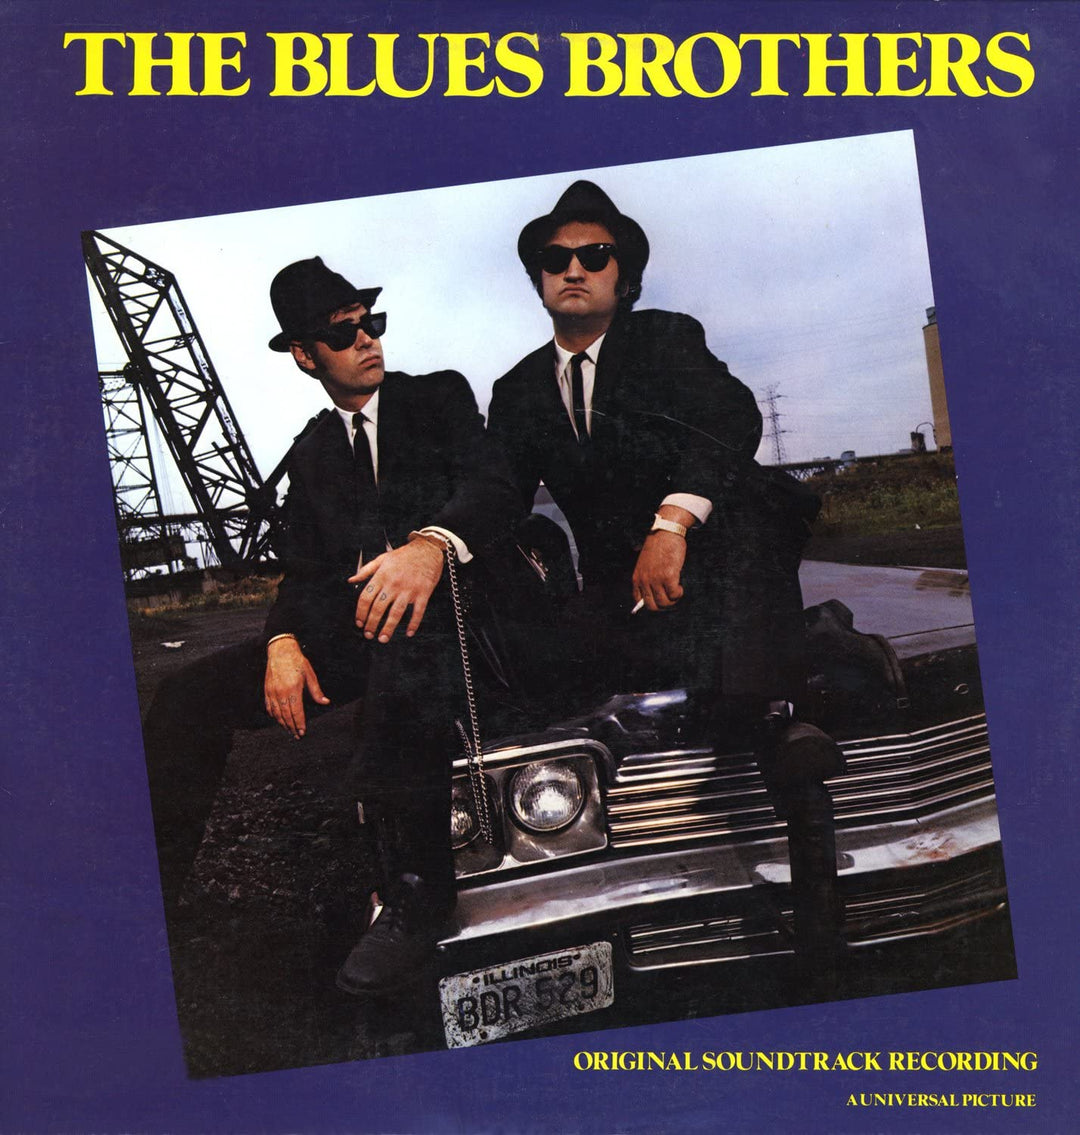 The Blue Brothers Soundtrack - The Blues Brothers [Audio CD]